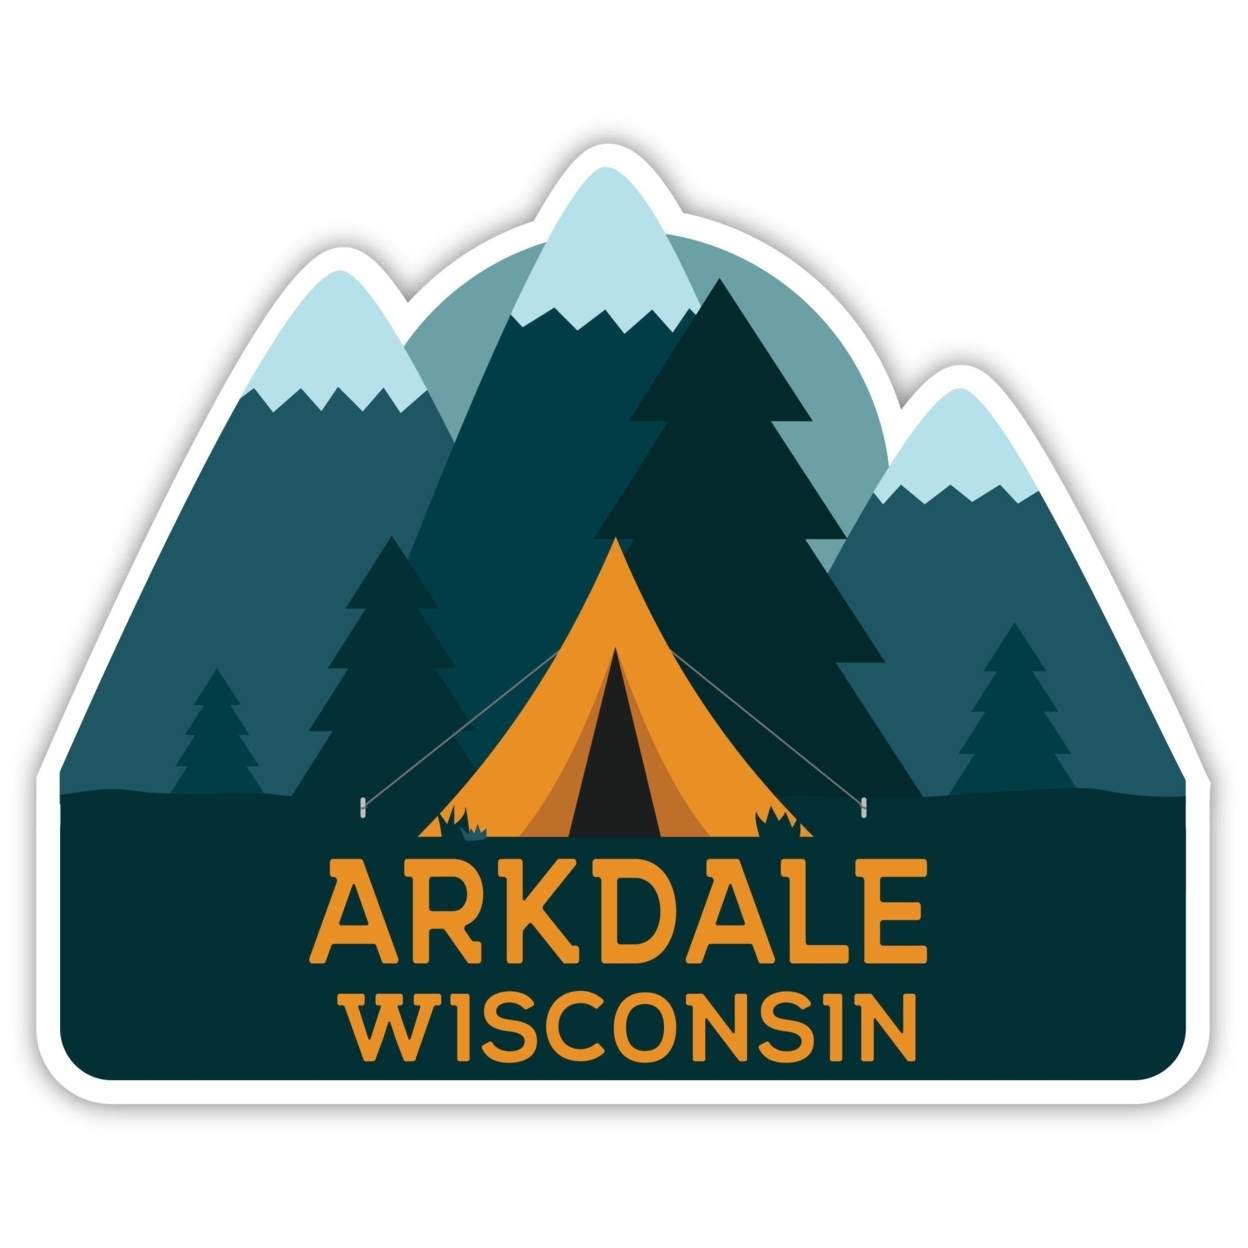 Arkdale Wisconsin Souvenir Decorative Stickers (Choose Theme And Size) - Single Unit, 4-Inch, Bear